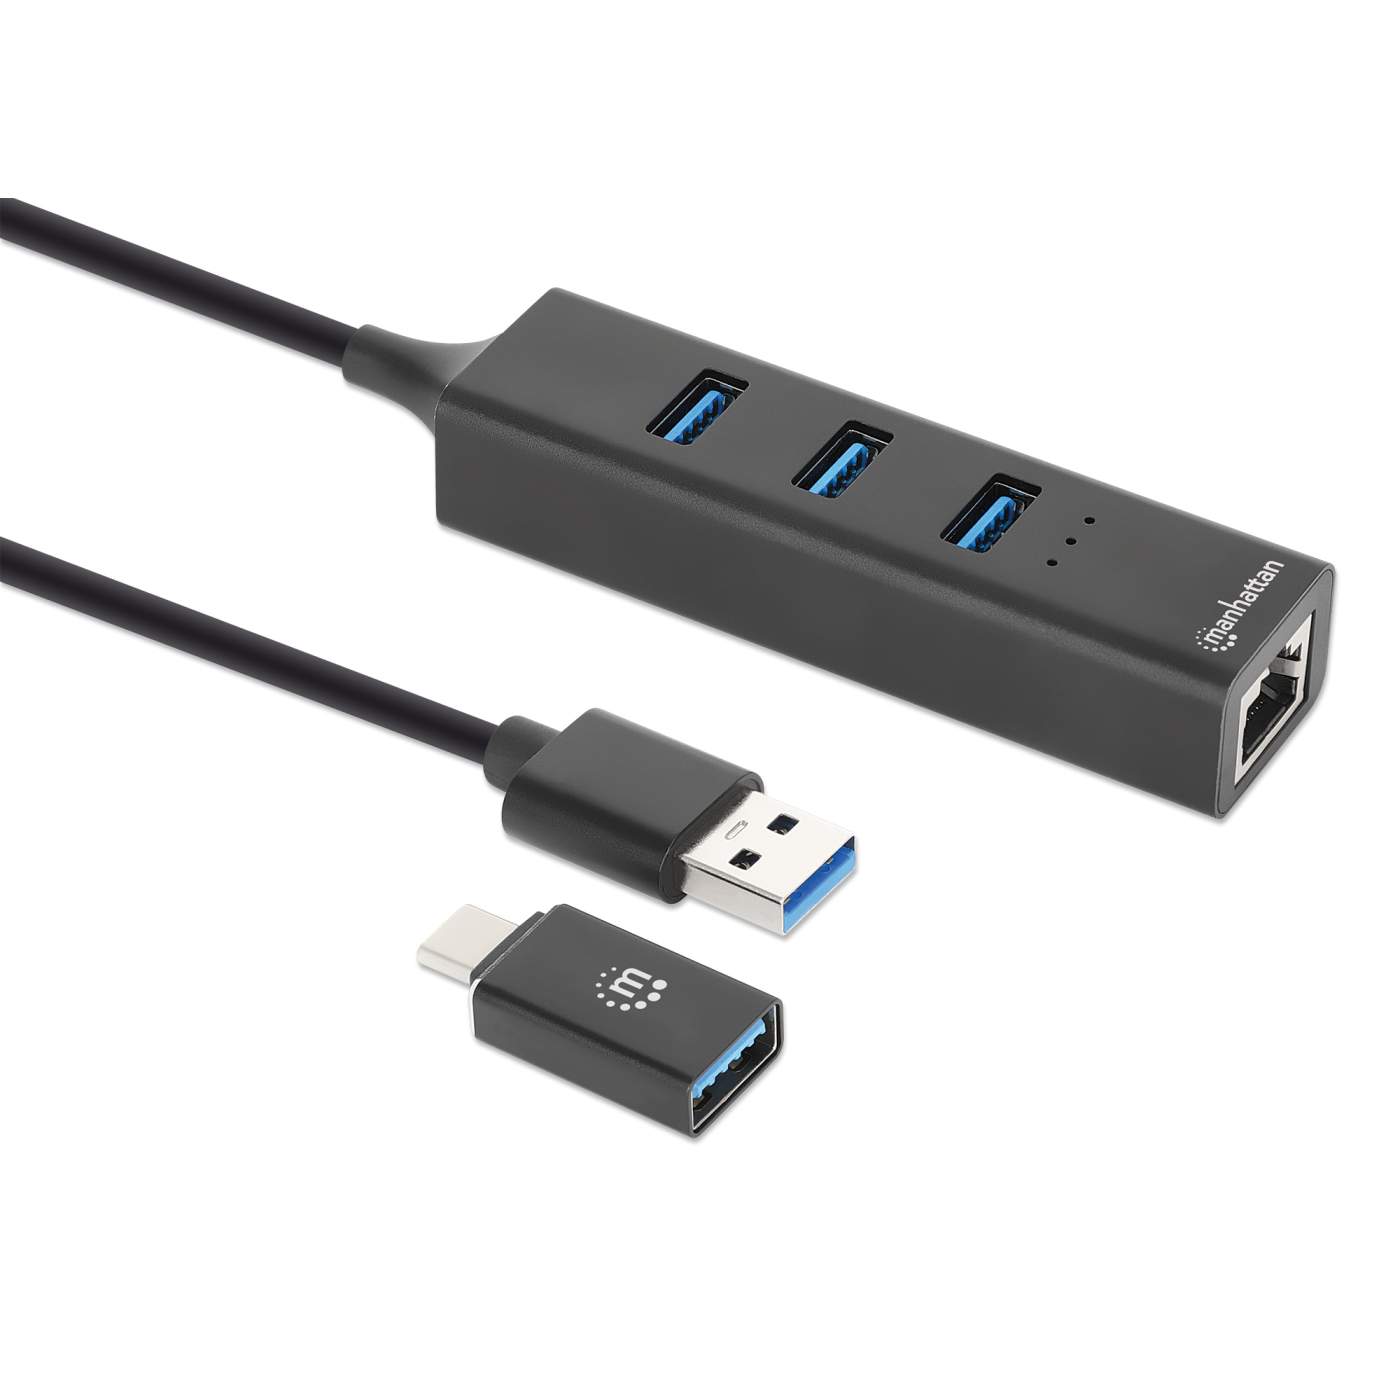 3-Port USB 3.0 Type-C/A Combo Hub with Gigabit Ethernet Network Adapter Image 3